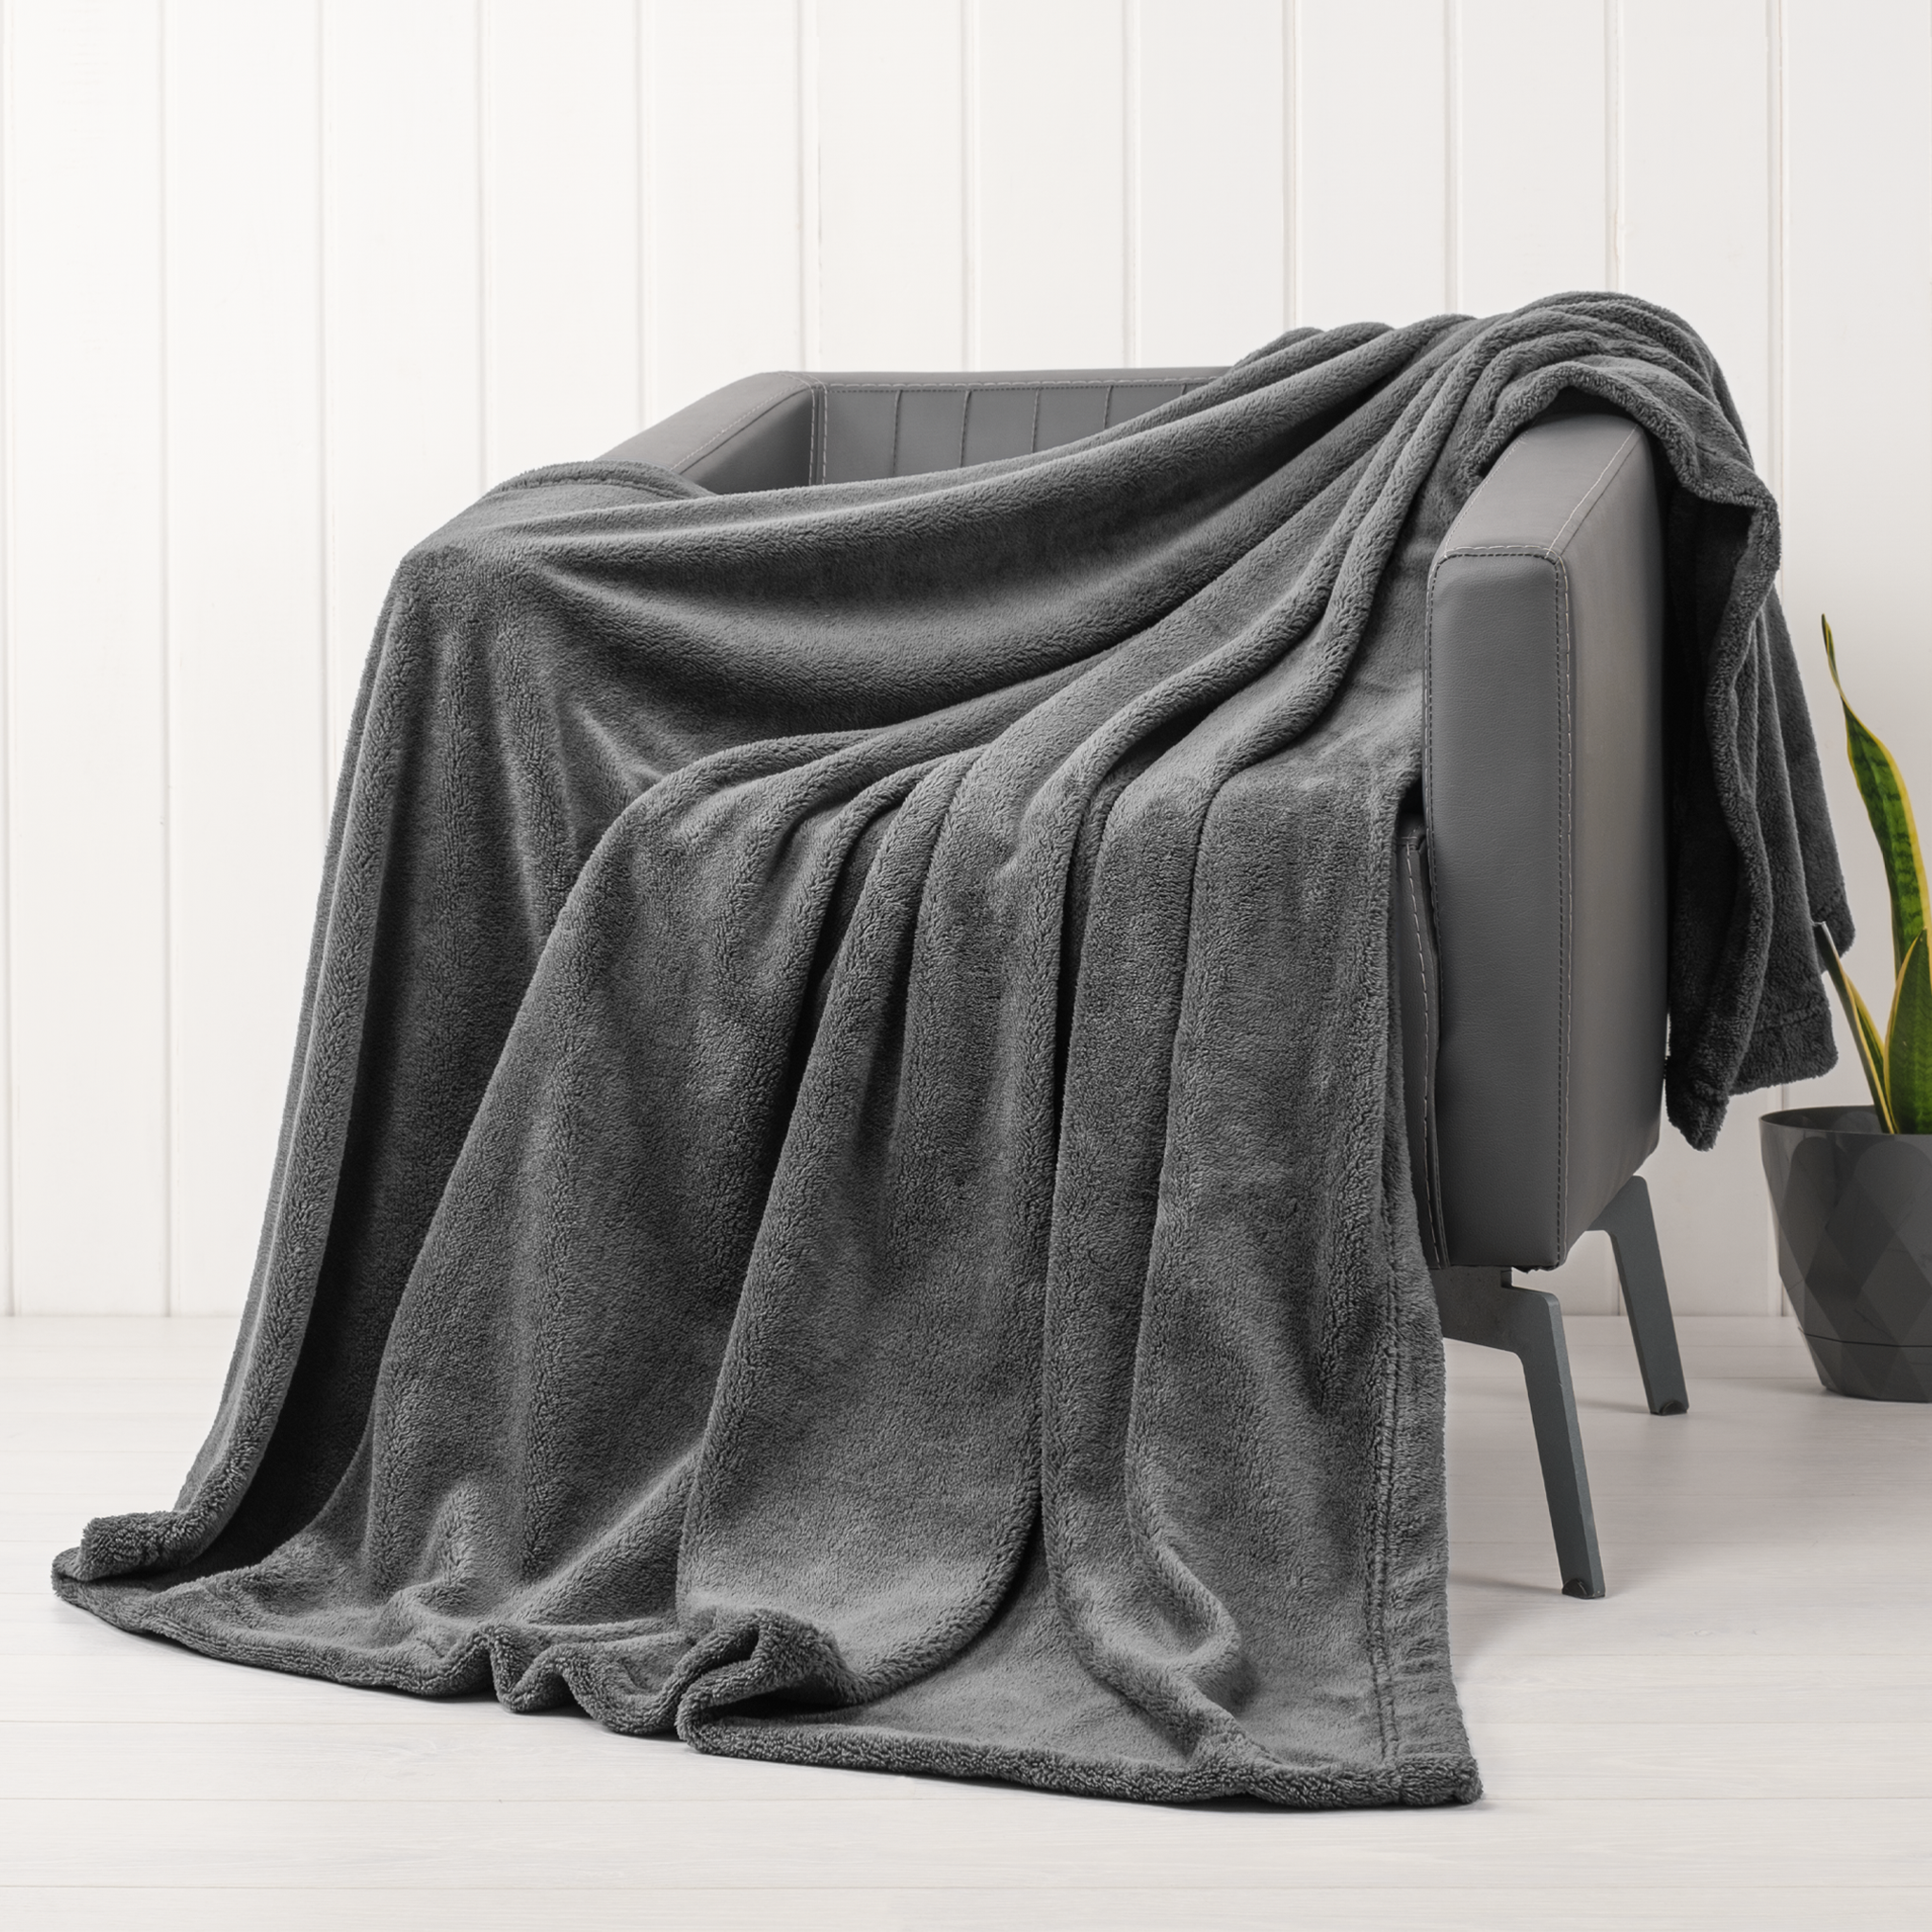 American Soft Linen - Bedding Fleece Blanket - Twin Size 60x80 inches - Gray - 1